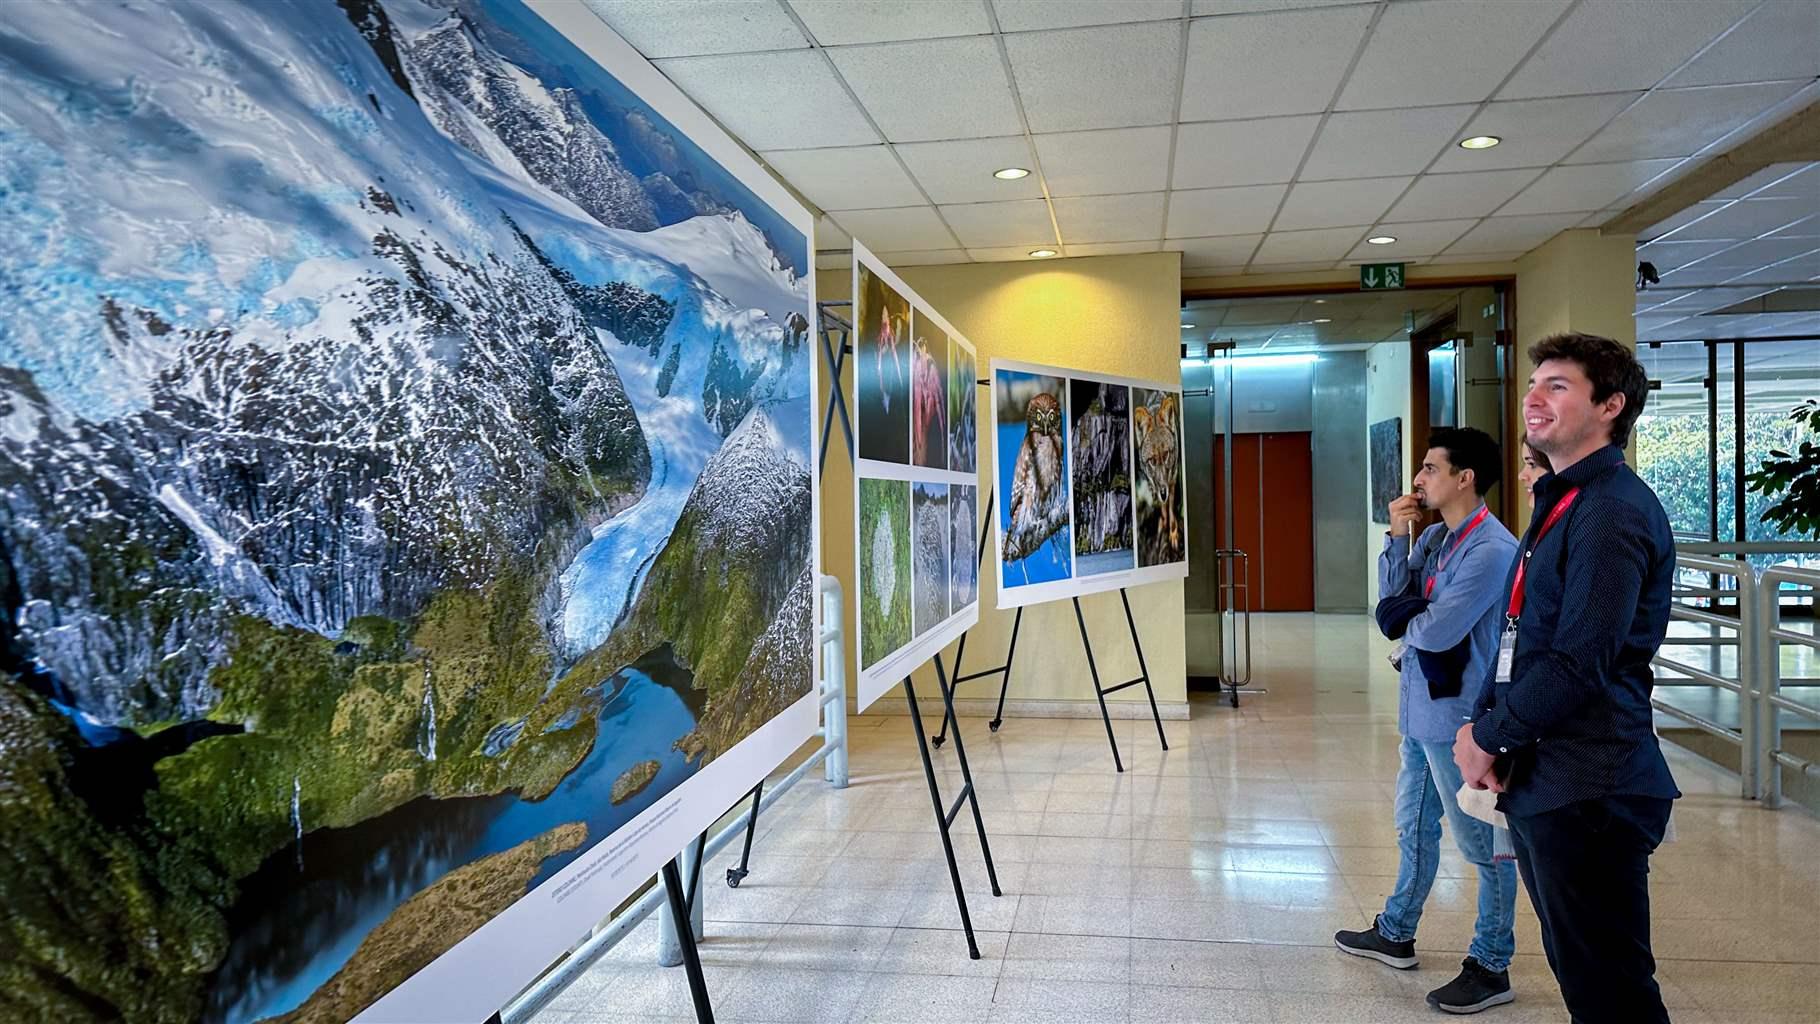 Three people pause in a hallway to look at large photographs displayed on a row of easels and showing some of Chilean Patagonia’s striking landscapes and wildlife. The scenes include various flora and fauna and, in the most prominent image on view, snow-topped mountains with an inky blue bay at their foothills.